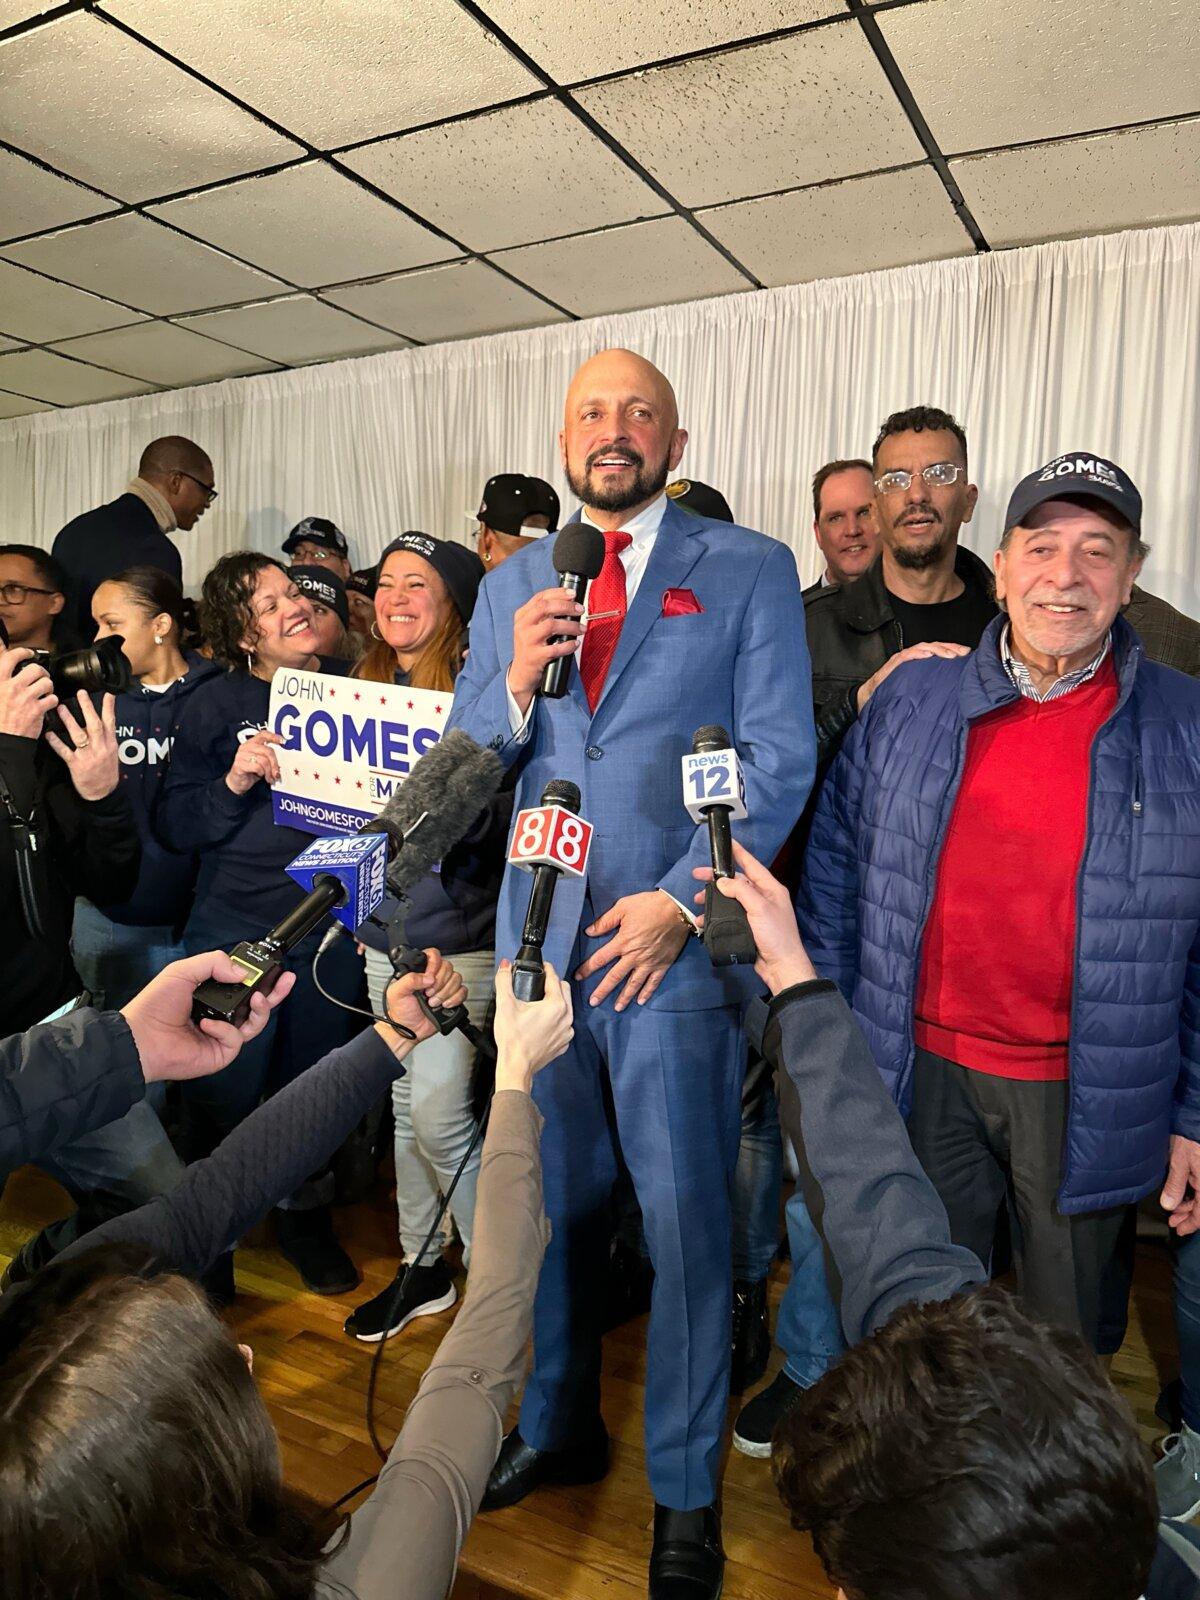 Candidate John Gomes at a watch party in Bridgeport, on Feb. 27, 2024, where he learned Joe Ganim was reelected. (Juliette Fairley/The Epoch Times)